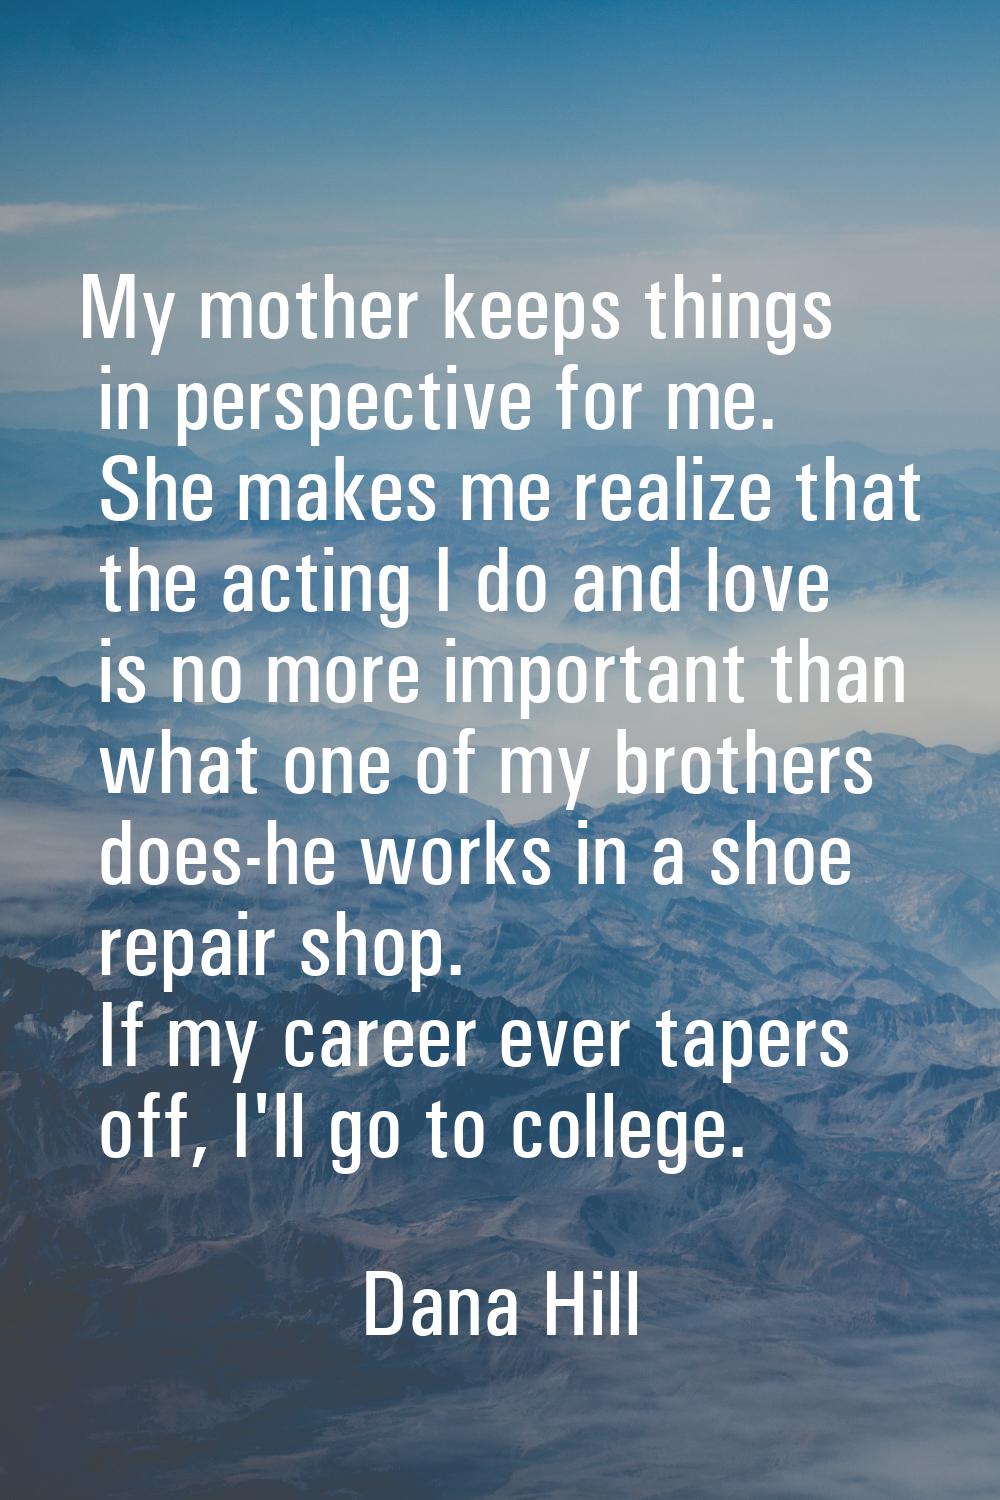 My mother keeps things in perspective for me. She makes me realize that the acting I do and love is